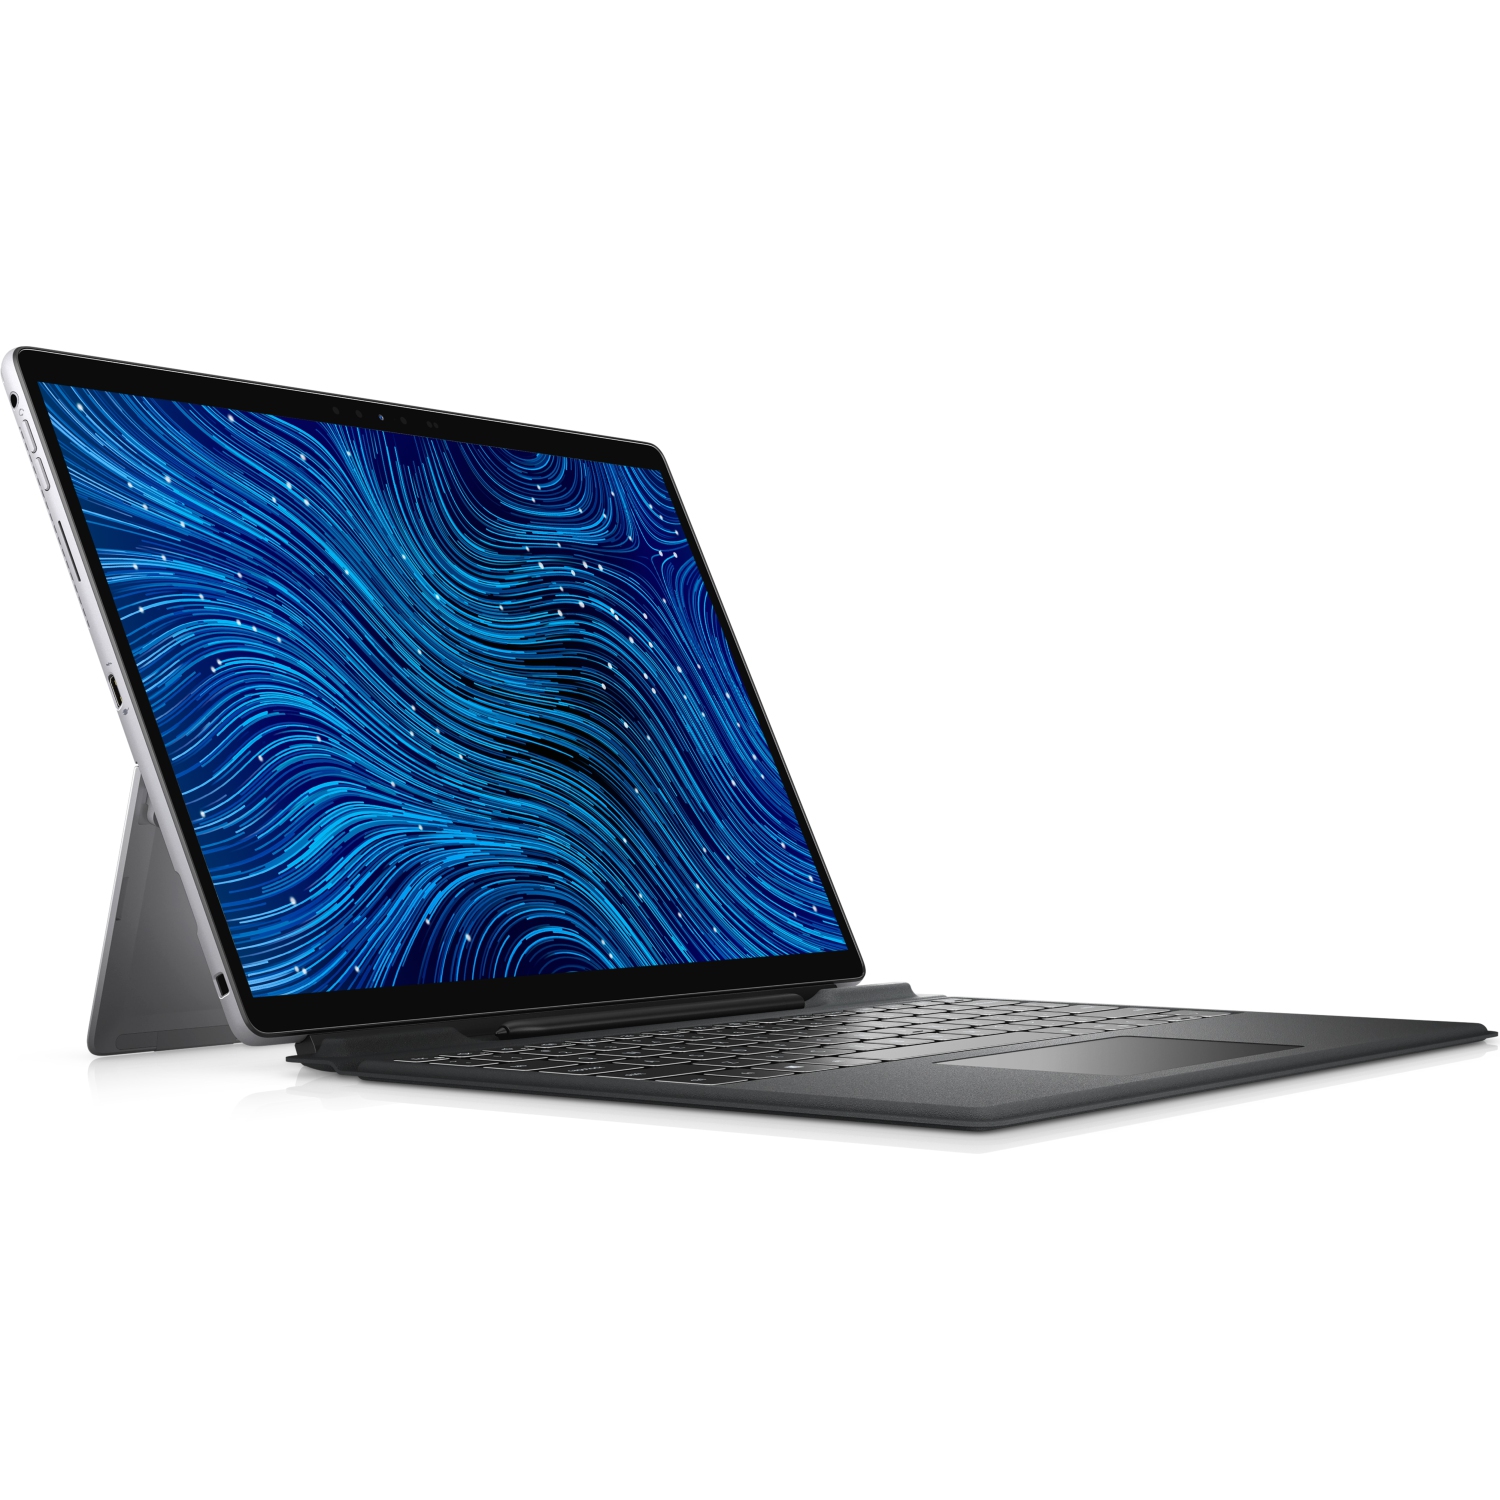 Refurbished (Excellent) - Dell Latitude 7000 7320 Detachable 13 2-in-1 (2021), 13" FHD+ Touch, Core i5, 512GB SSD, 8GB RAM, 4 Cores @ 4.2 GHz, 11th Gen CPU Certified